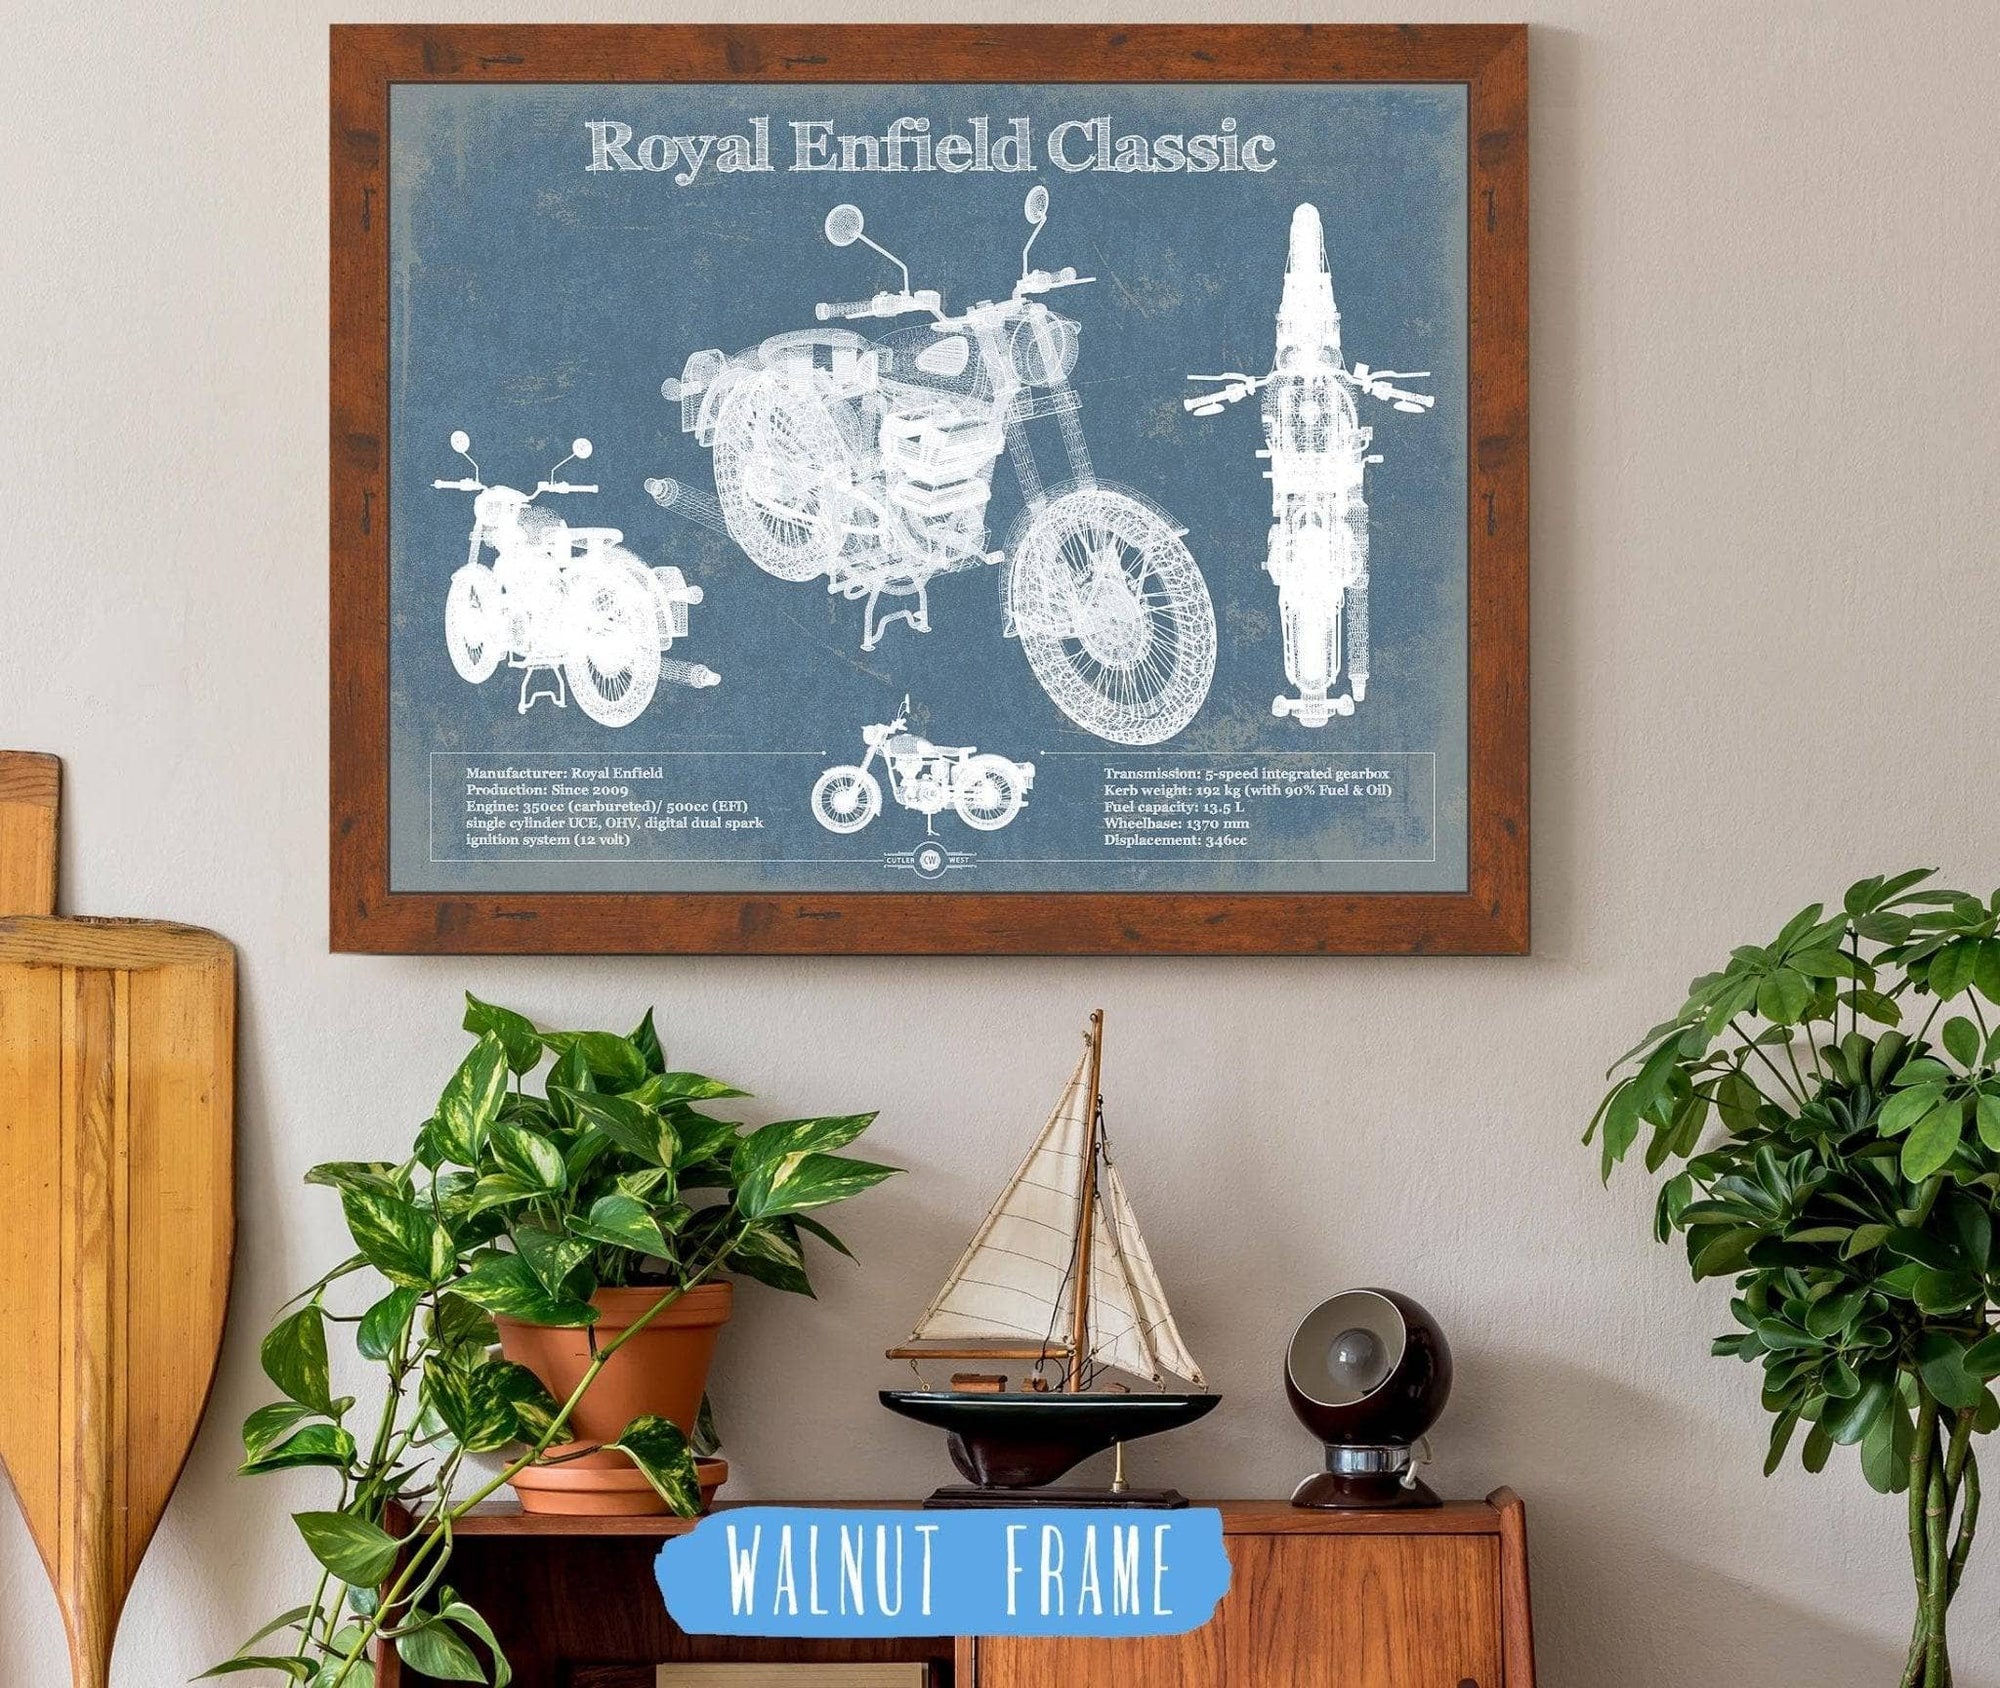 Cutler West 14" x 11" / Walnut Frame Royal Enfield Classis 350 And 500 Blueprint Motorcycle Patent Print 933350105_17675